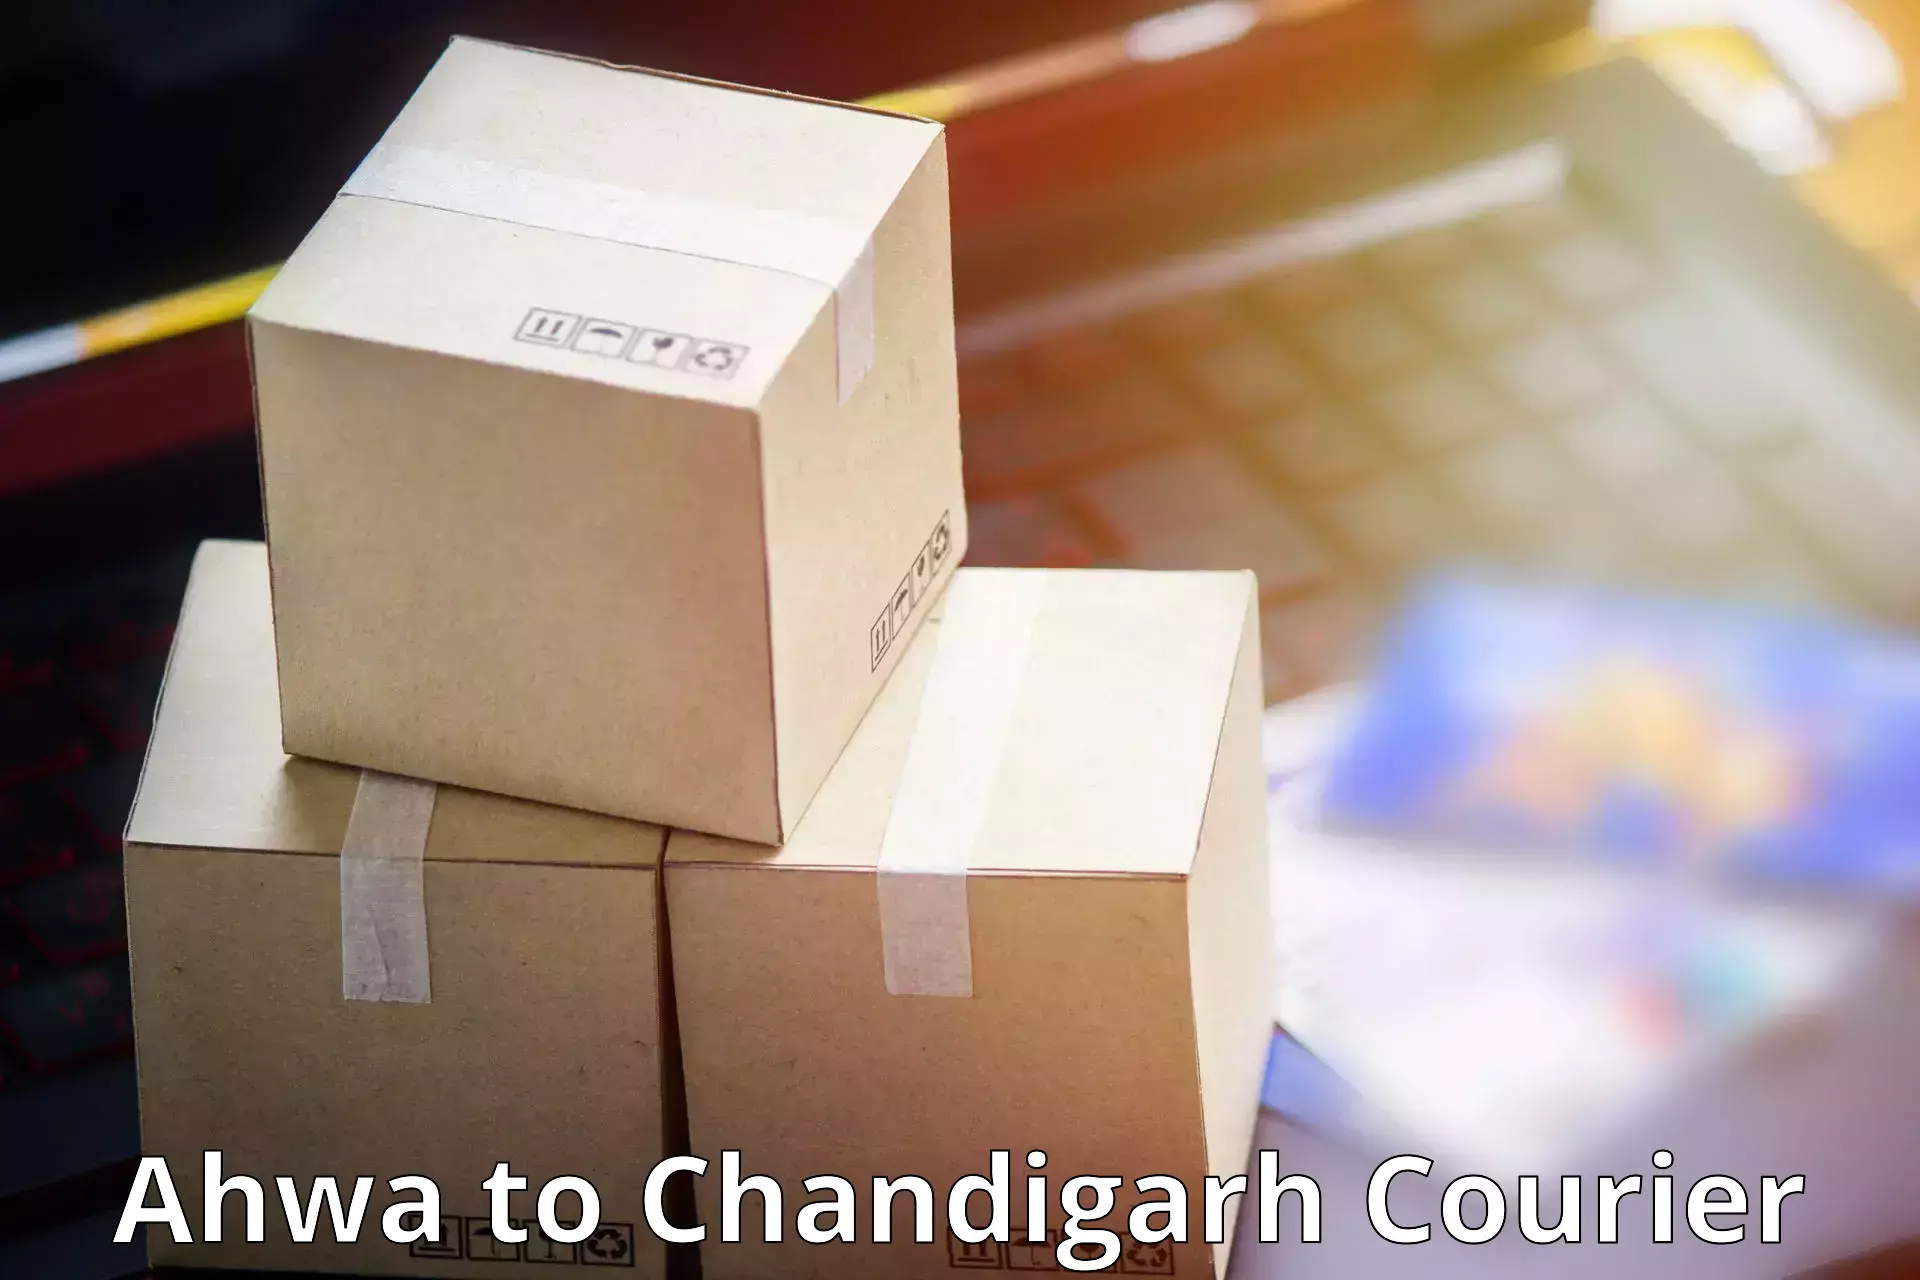 Courier service efficiency Ahwa to Panjab University Chandigarh